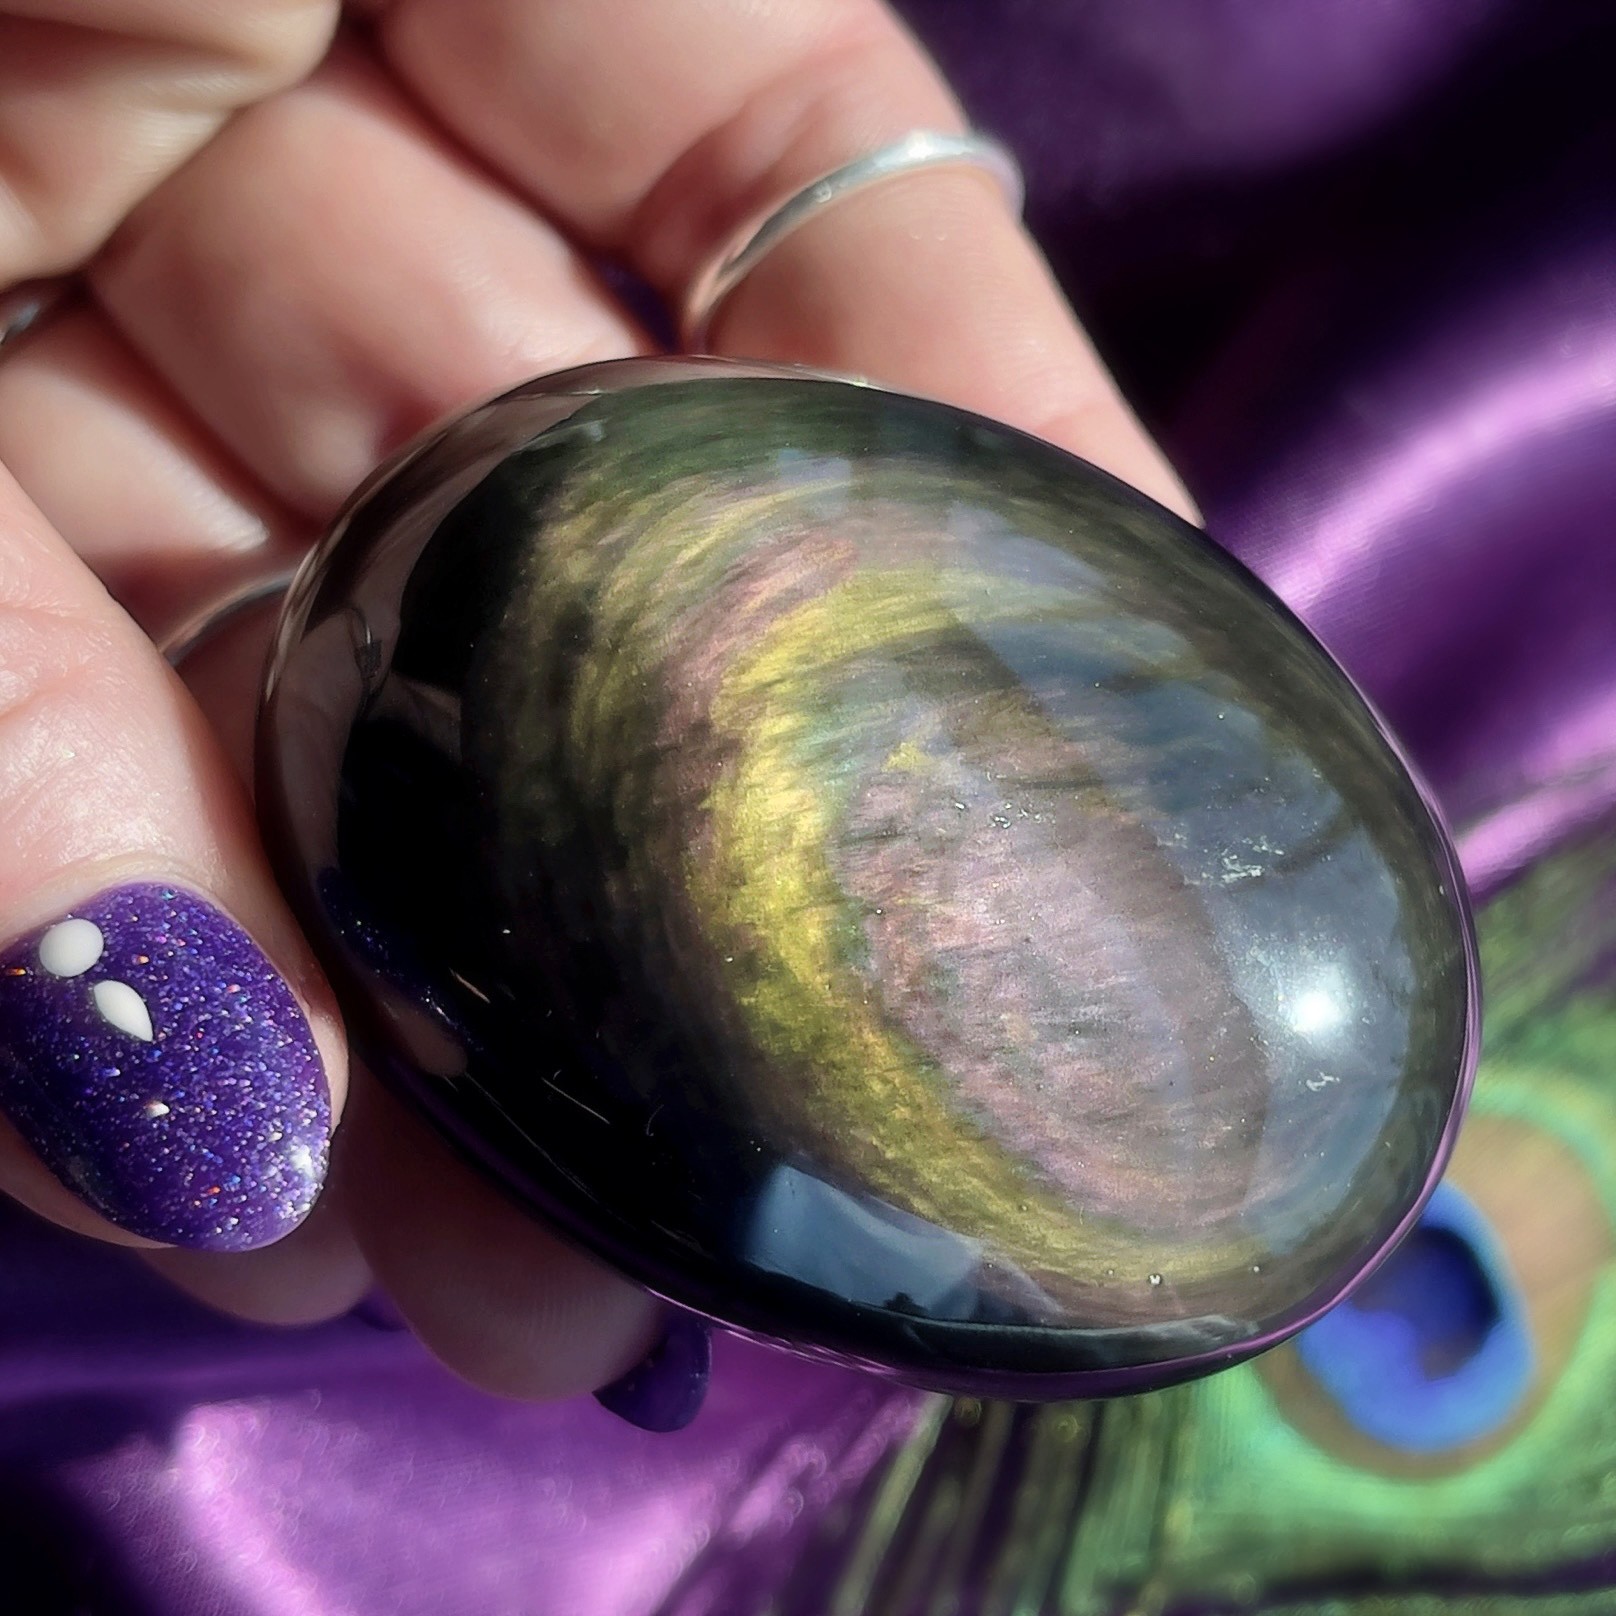 Finished this beauty today! 🩷🖤 A marvelous Velvet Obsidian stone